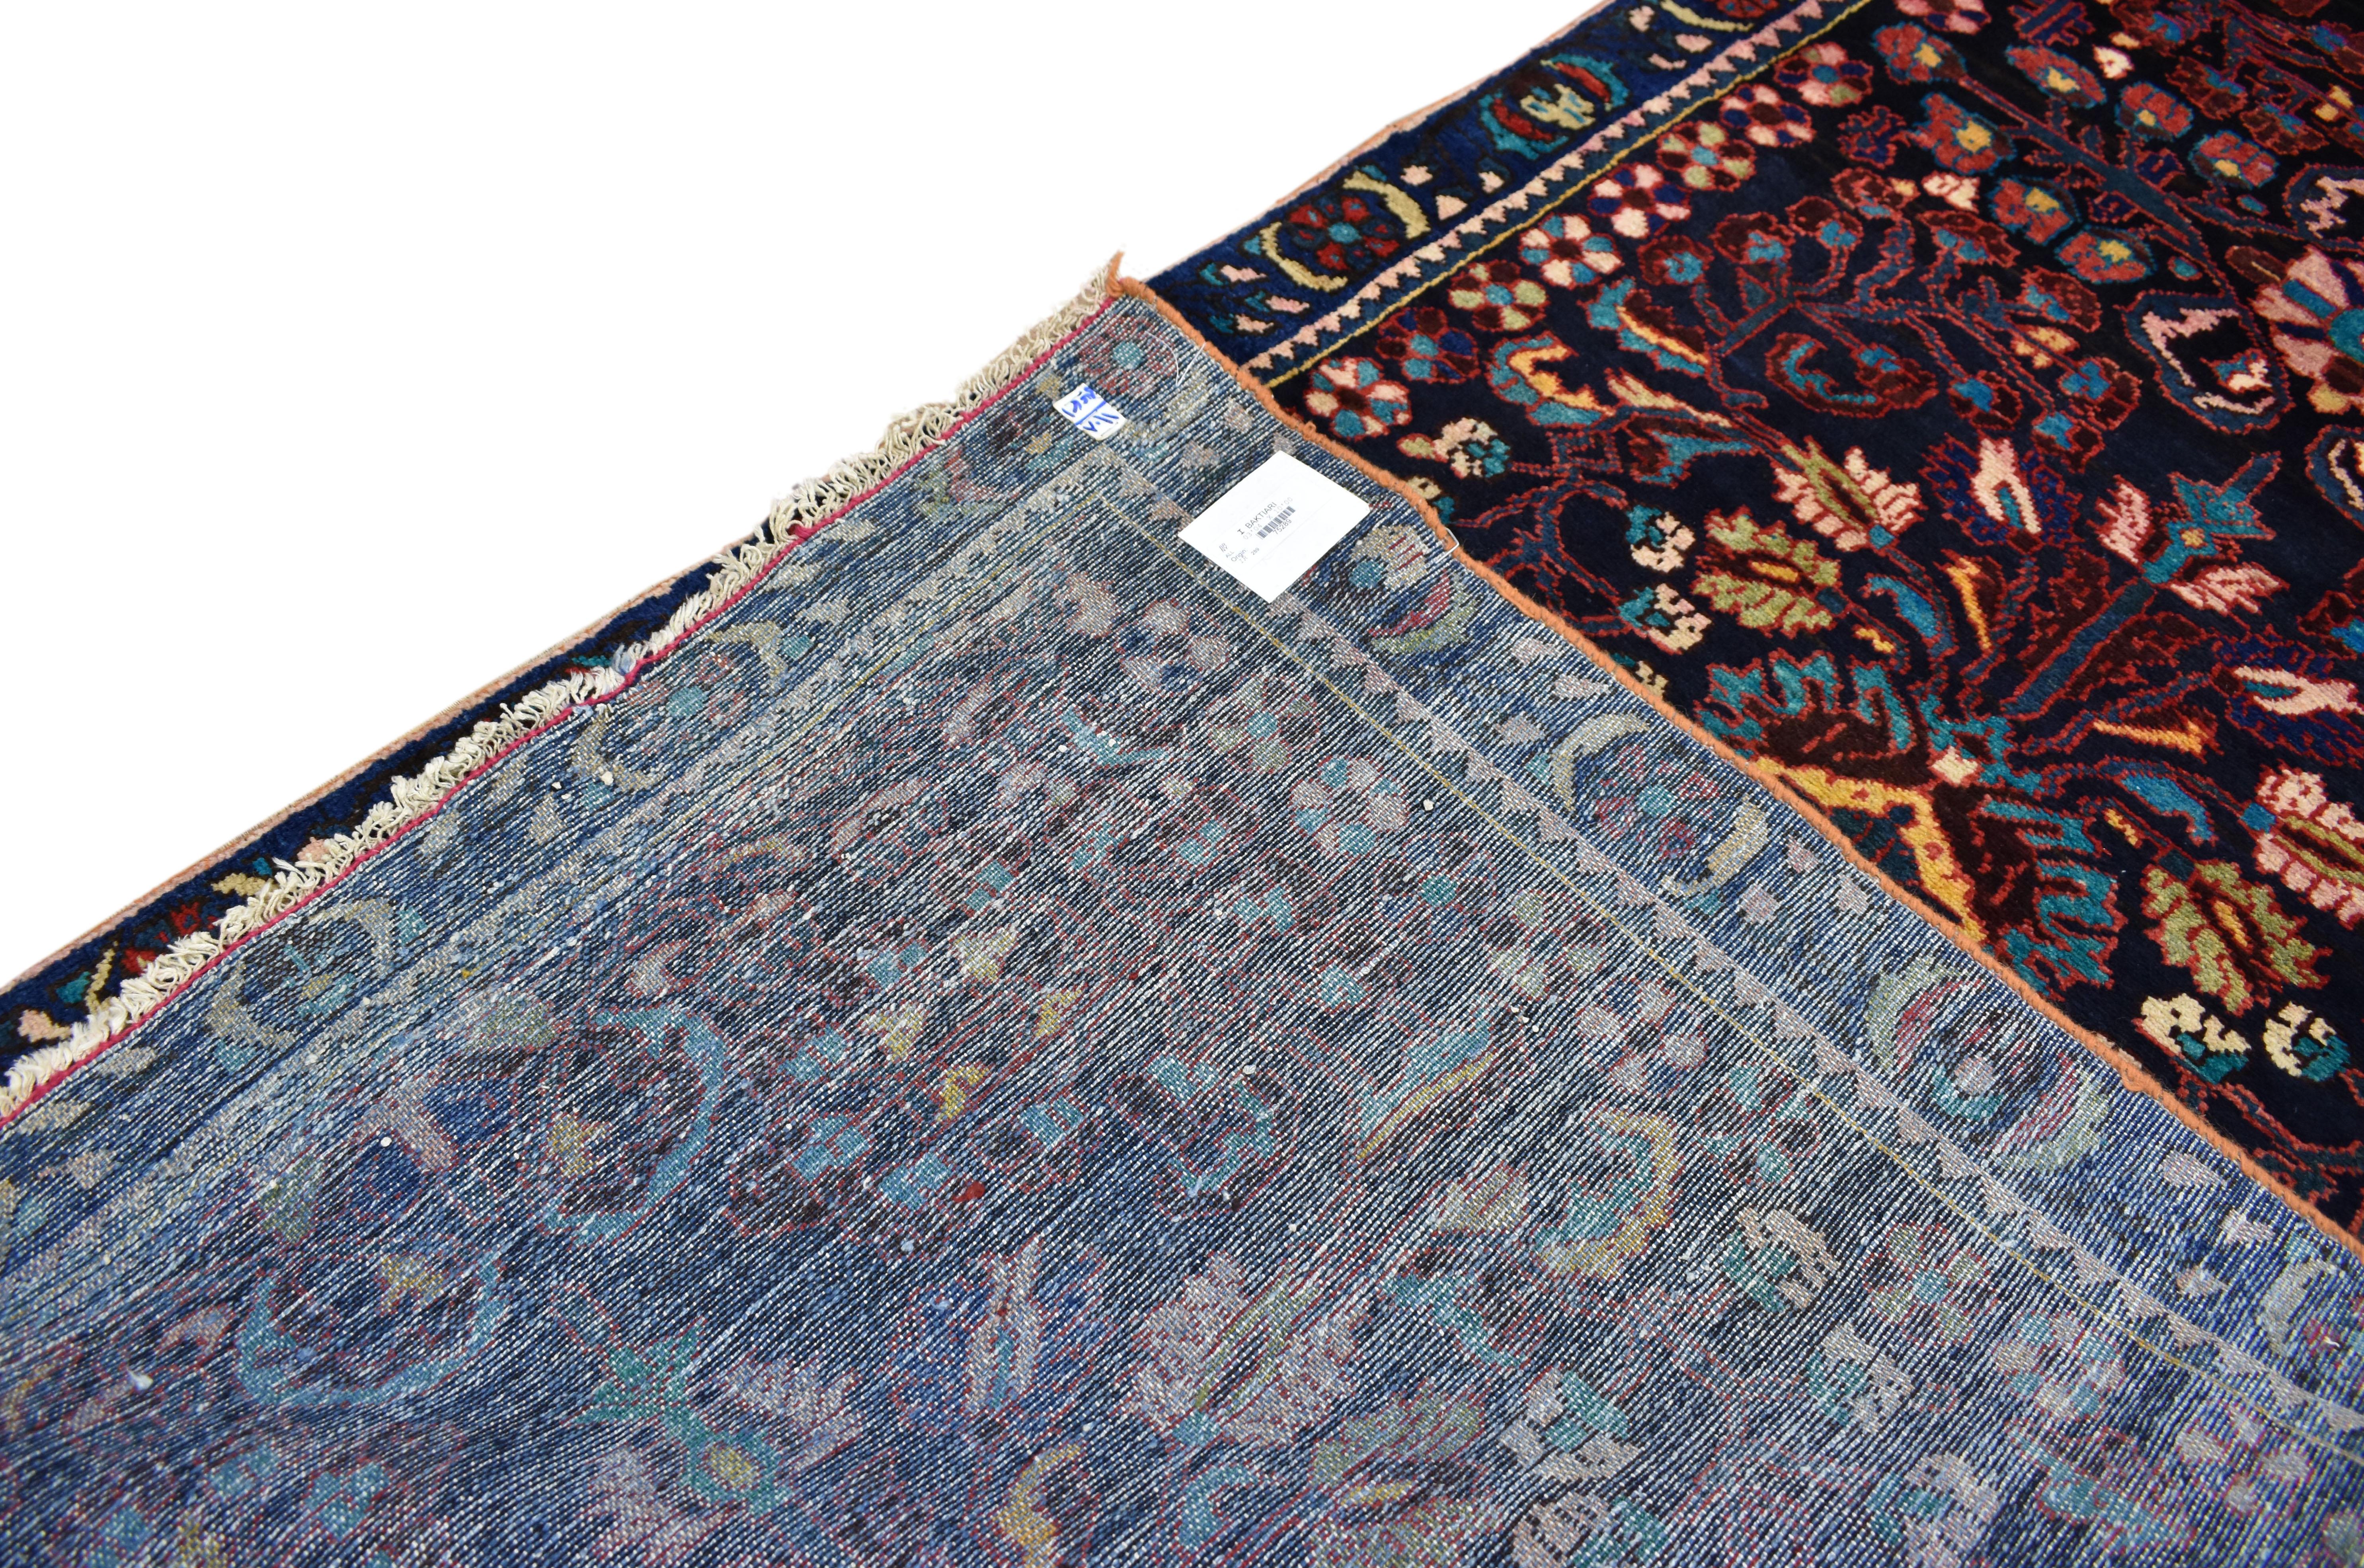 Hand-Knotted Antique Persian Bakhtiari Runner with Rich Jewel-Tones, Hallway Runner For Sale